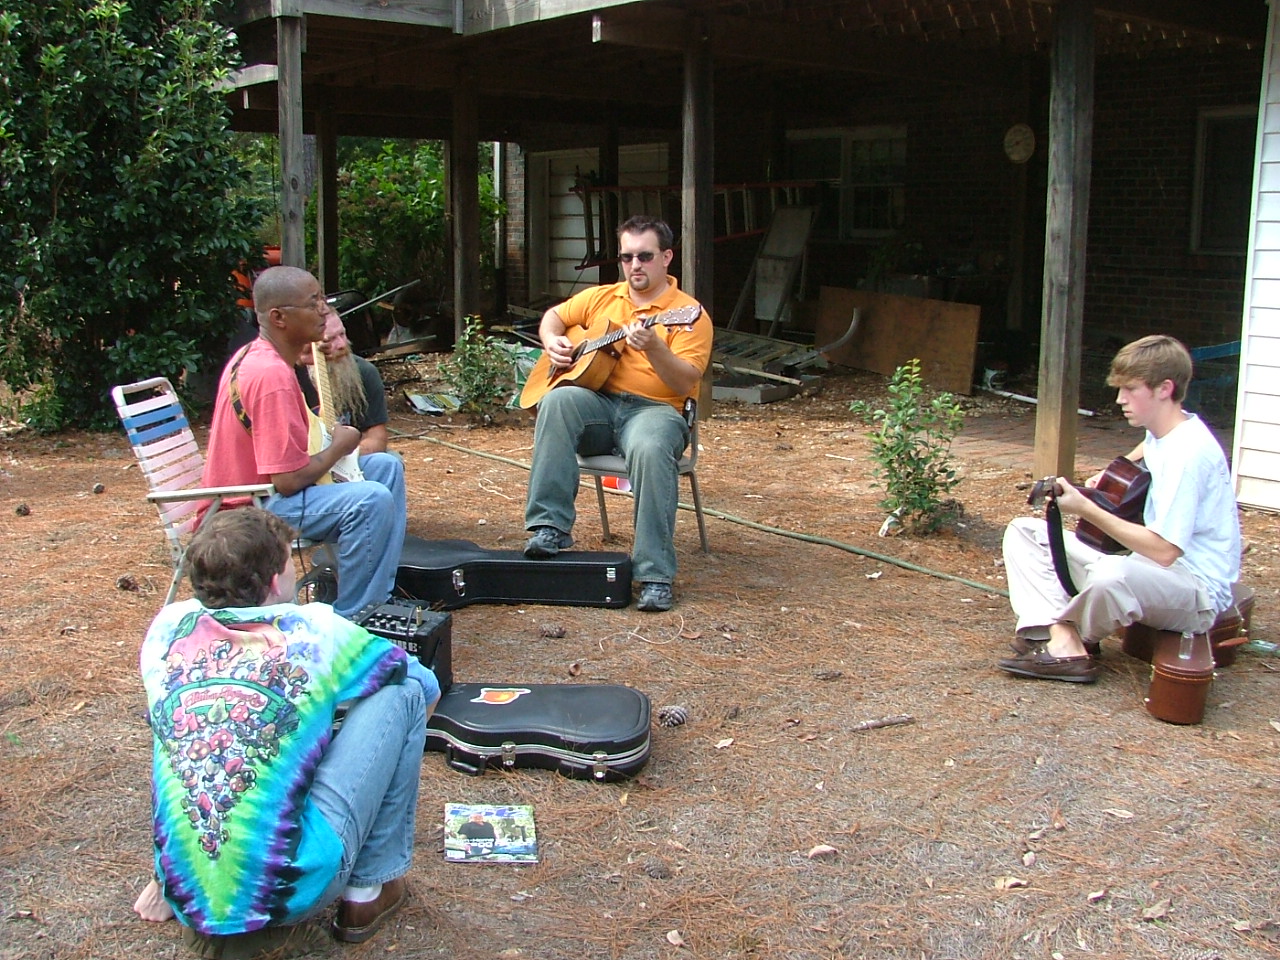 bluedad,slowhand, jessica and philip playing some tunes on Schroomriver.